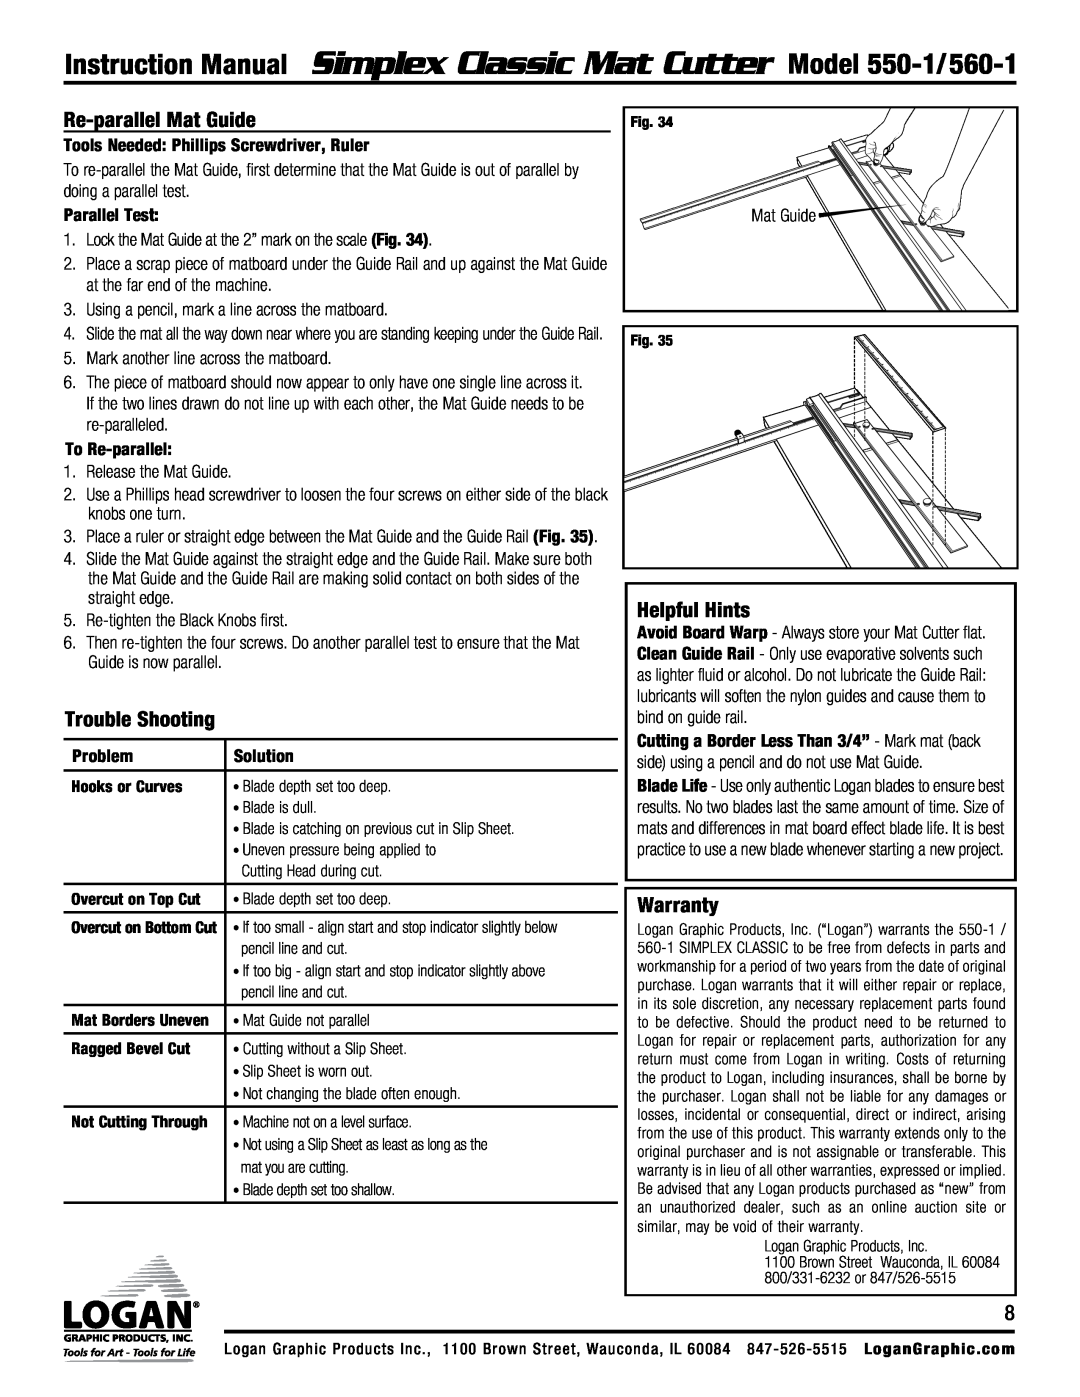 Logan Graphic Products 550-1, 560-1 instruction manual Re-parallel Mat Guide, Trouble Shooting, Helpful Hints, Warranty 